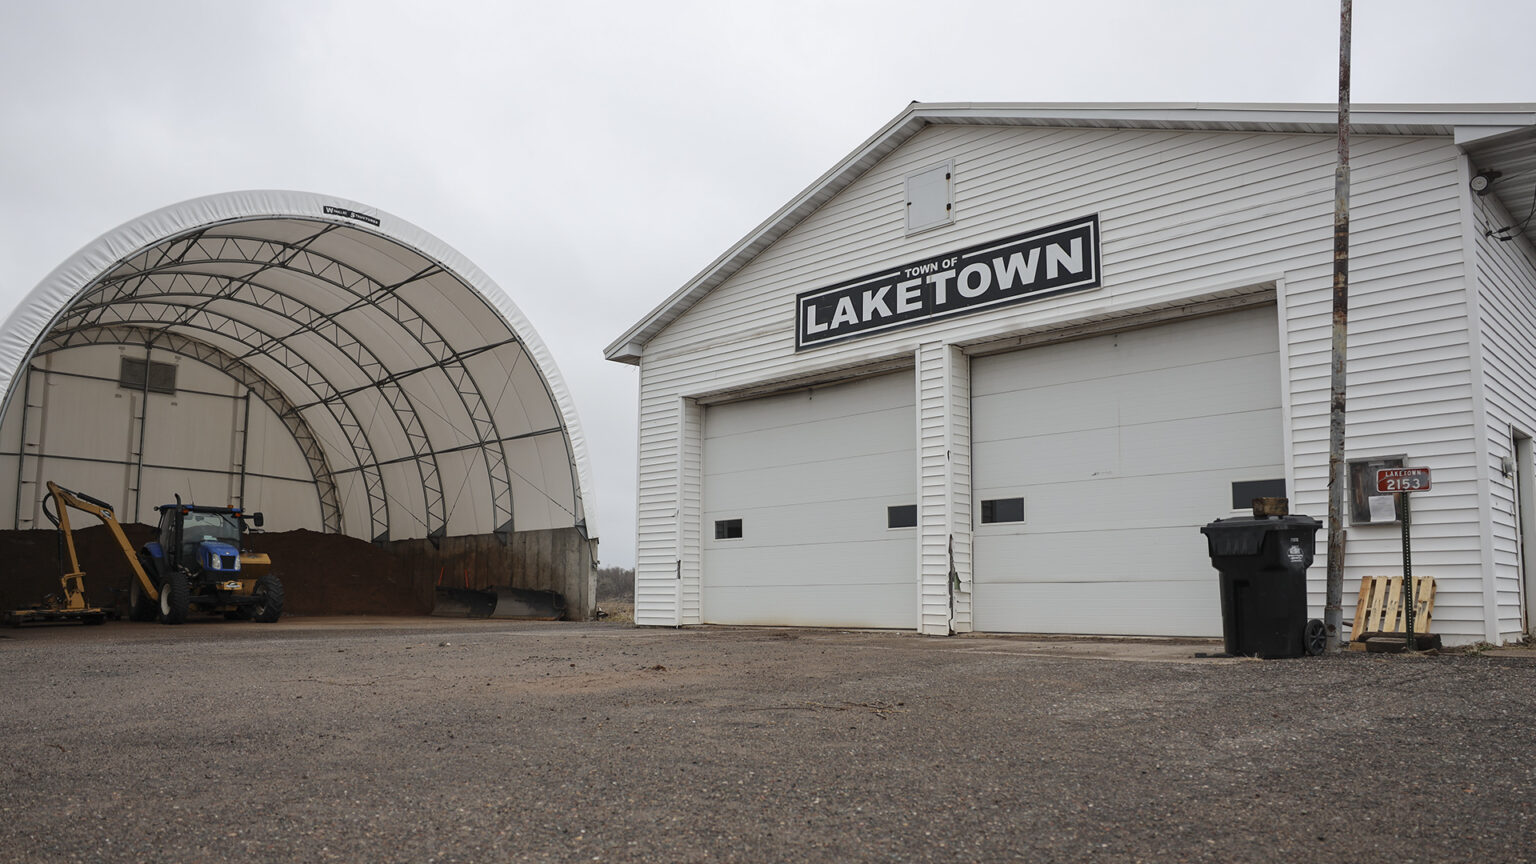 A building with tall double garage doors and a sign reading Town of Laketown stands next to a half-round shed with metal framing and a plastic roof and rear wall.